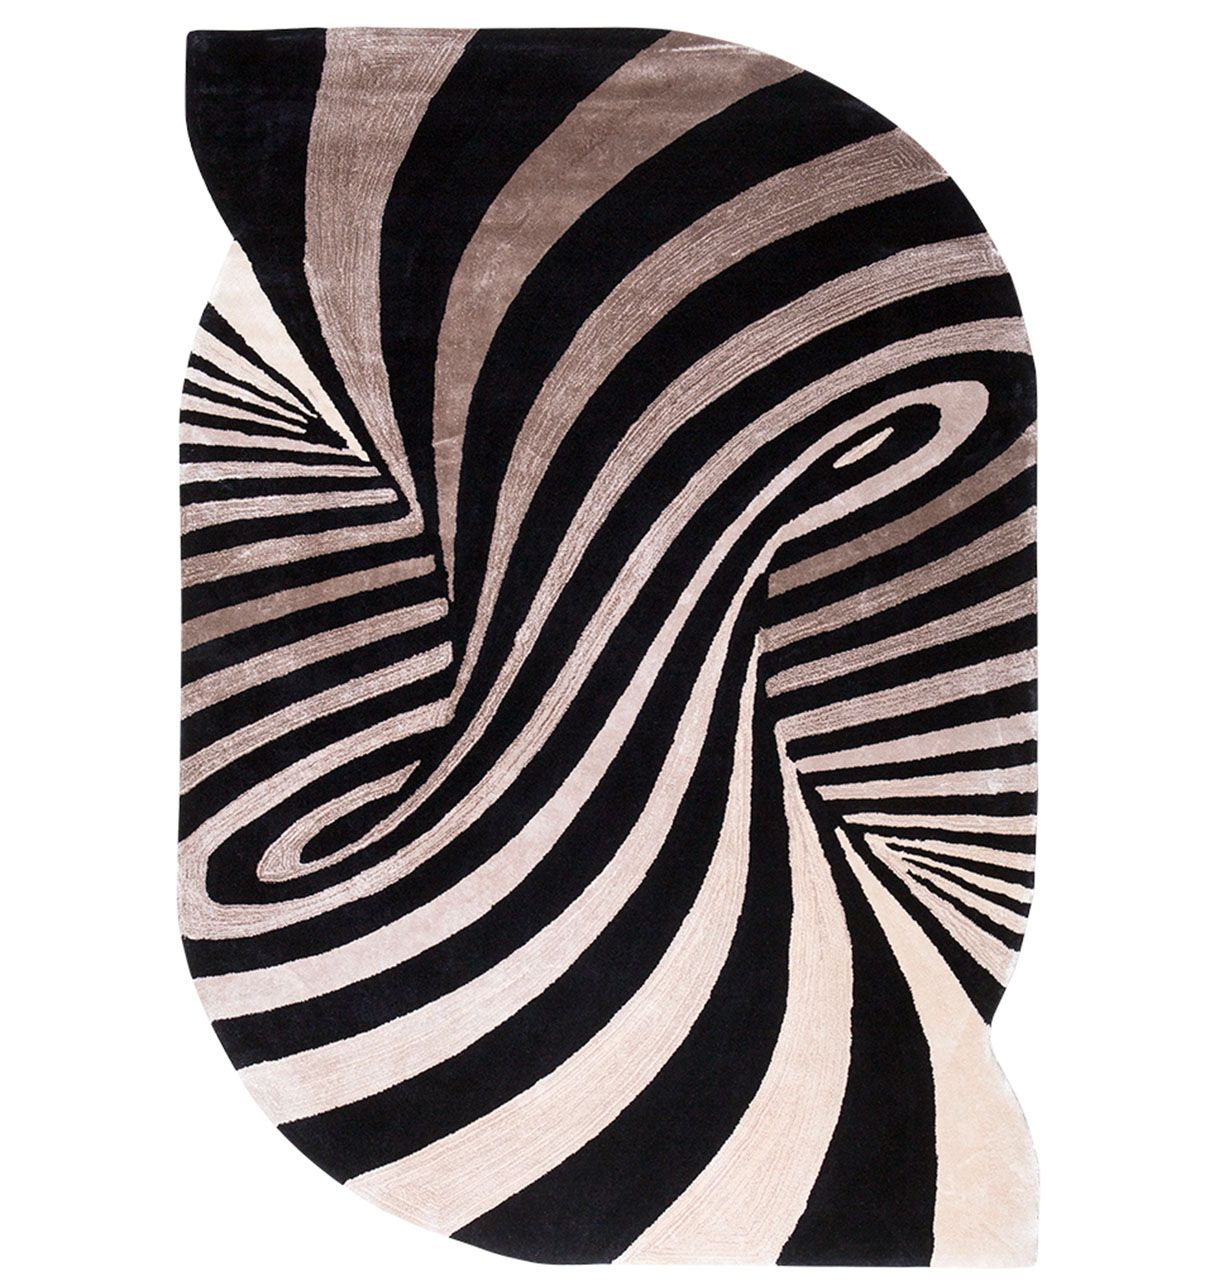 Living Room Rug Black and Shaded Beige - Volutes